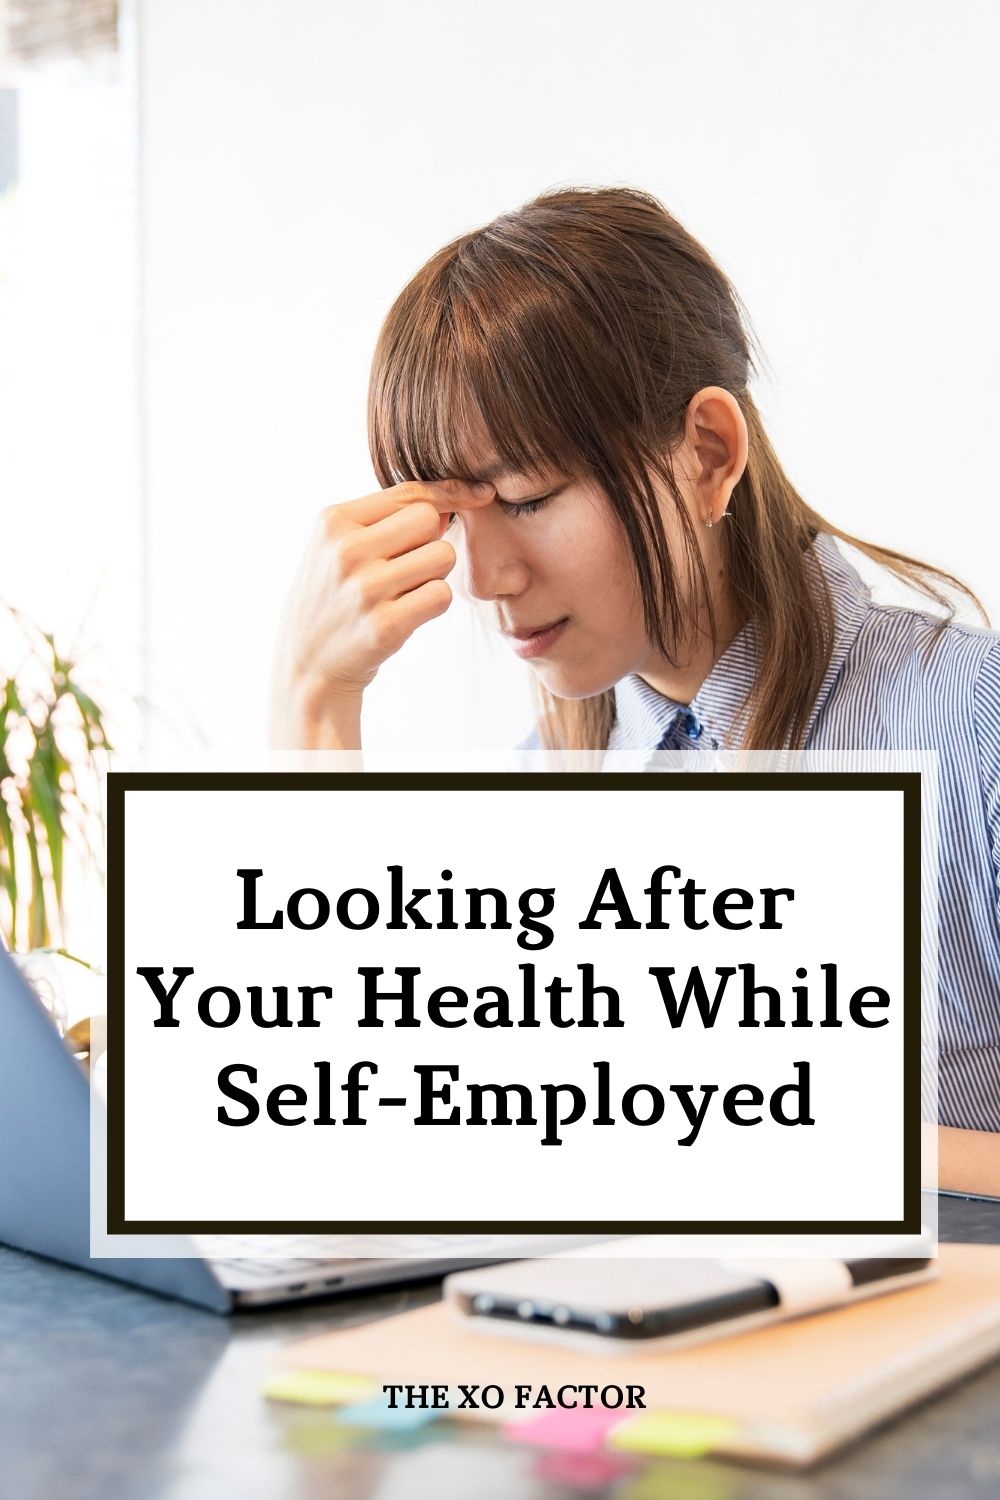 Looking After Your Health While Self-Employed